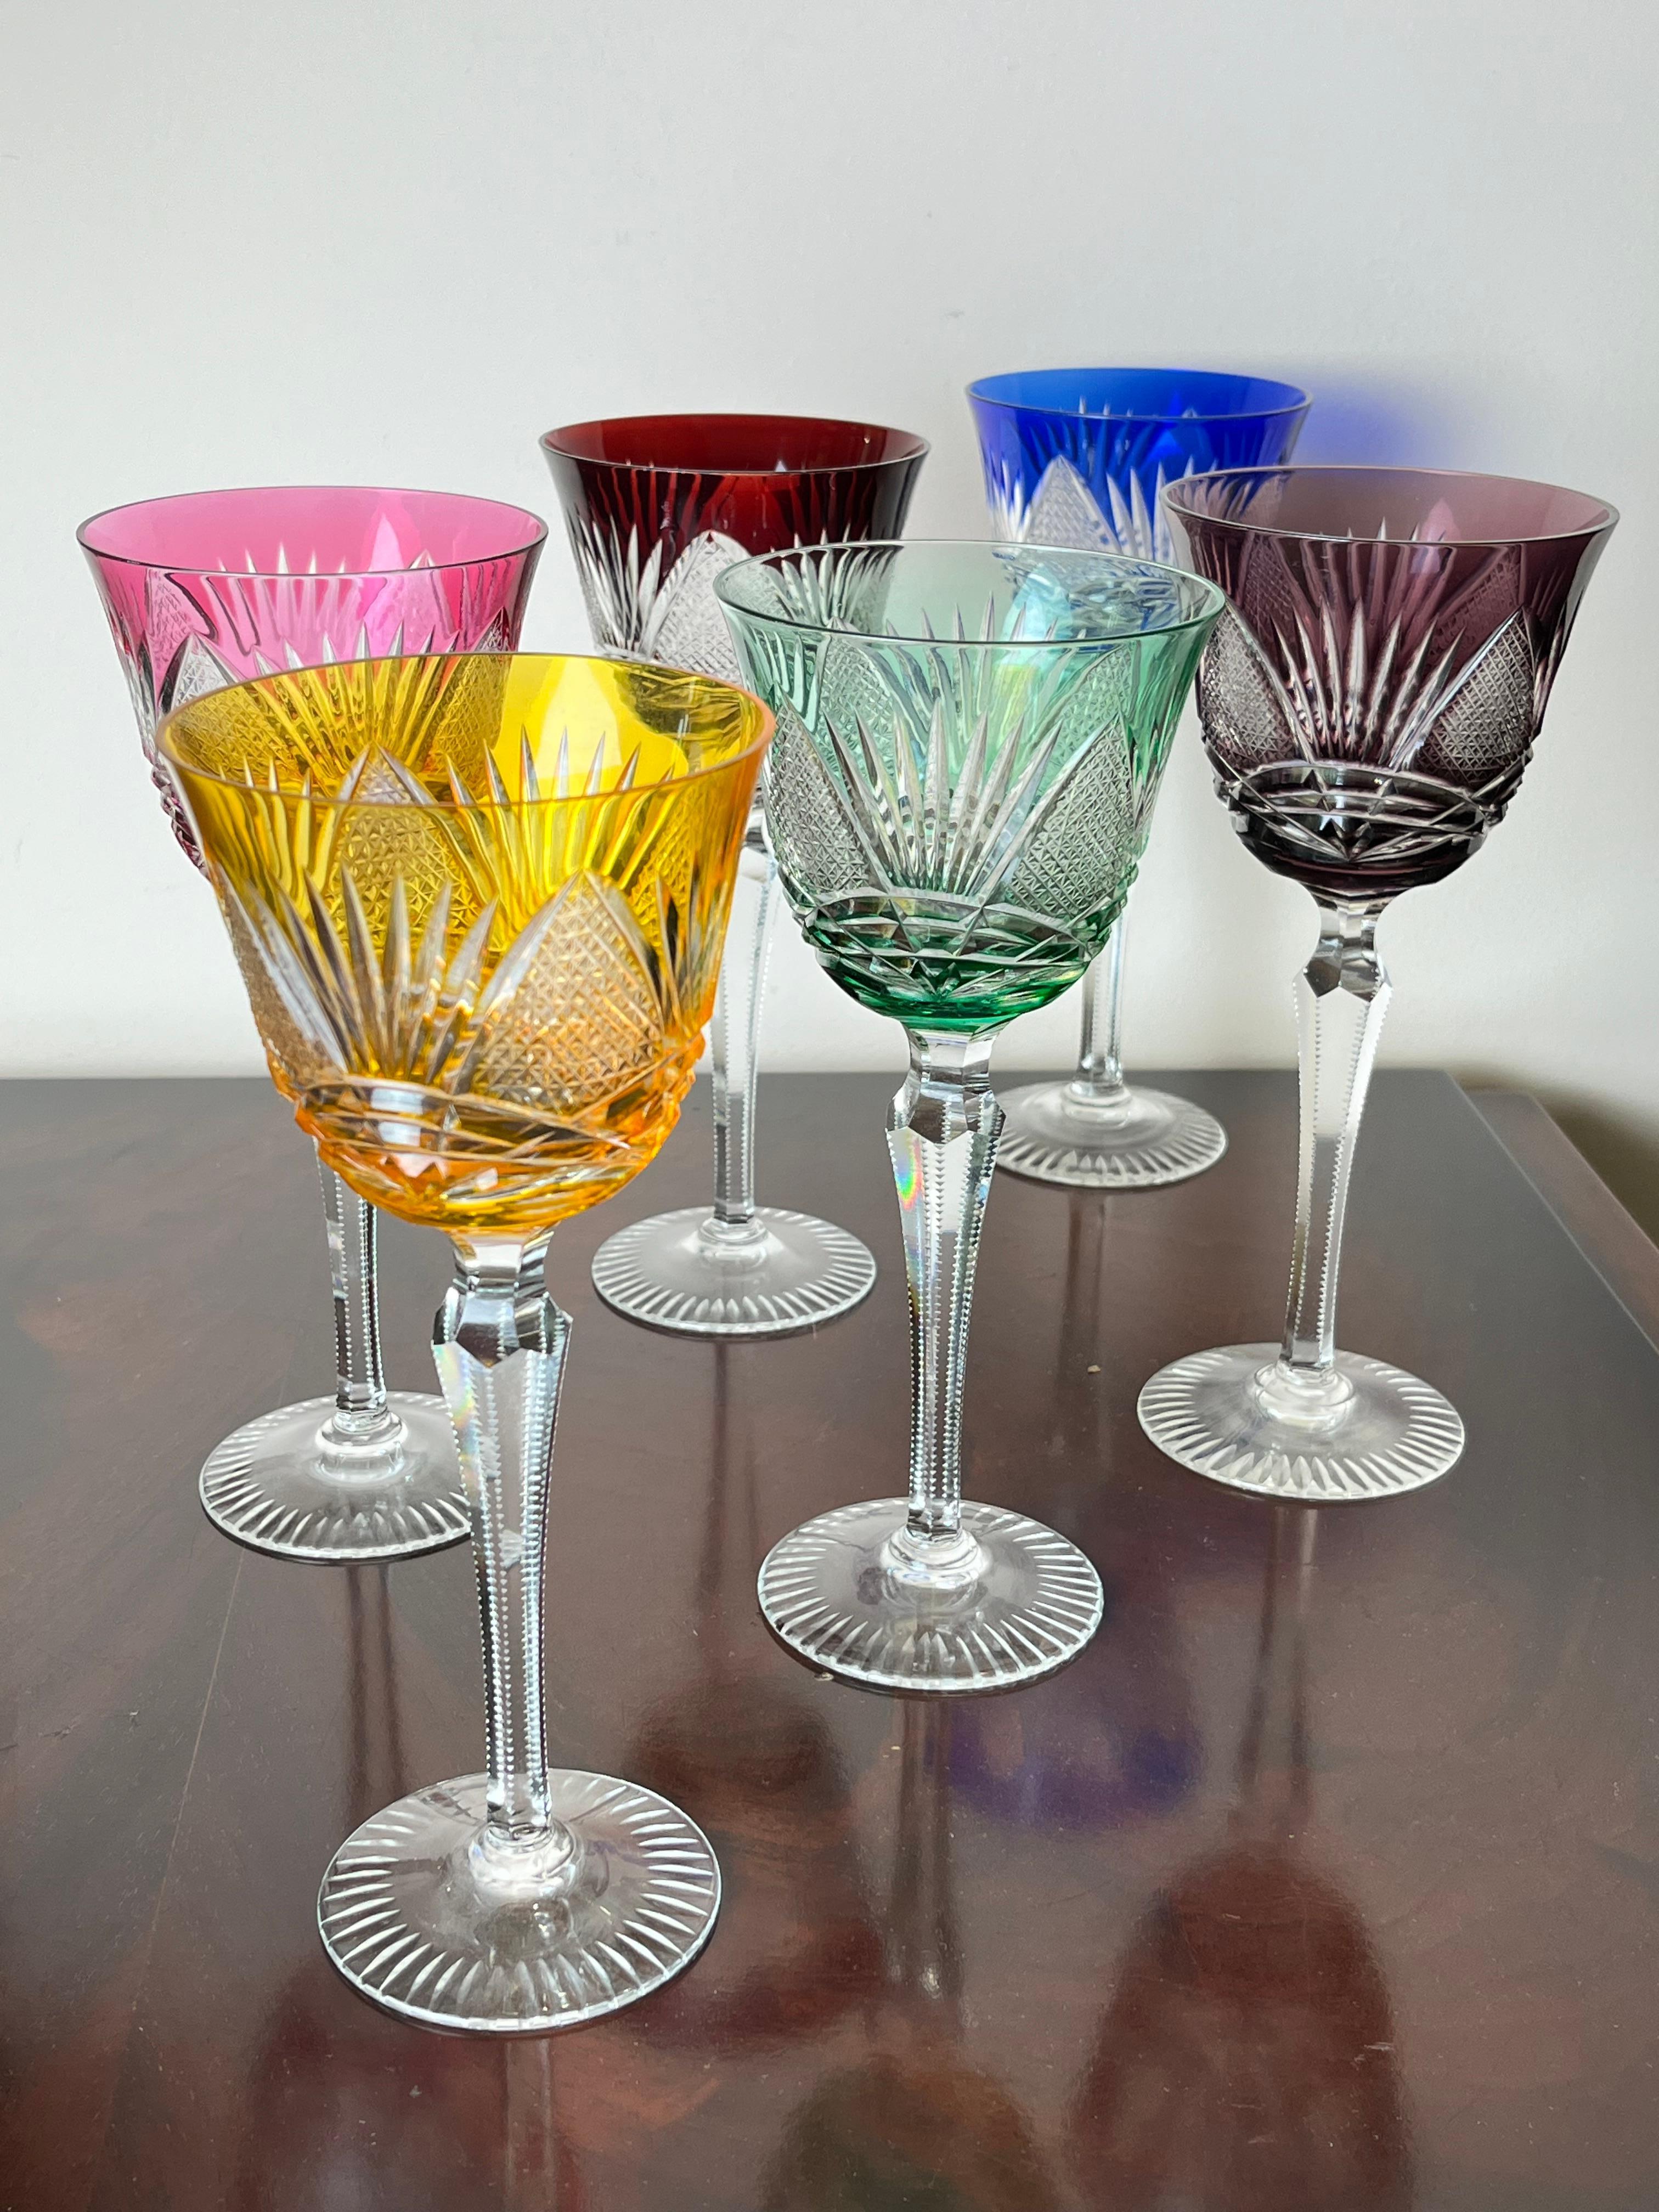 Set of 6 colored crystal glasses, Italy, 1950s
Found in a noble apartment. Intact and in excellent condition.